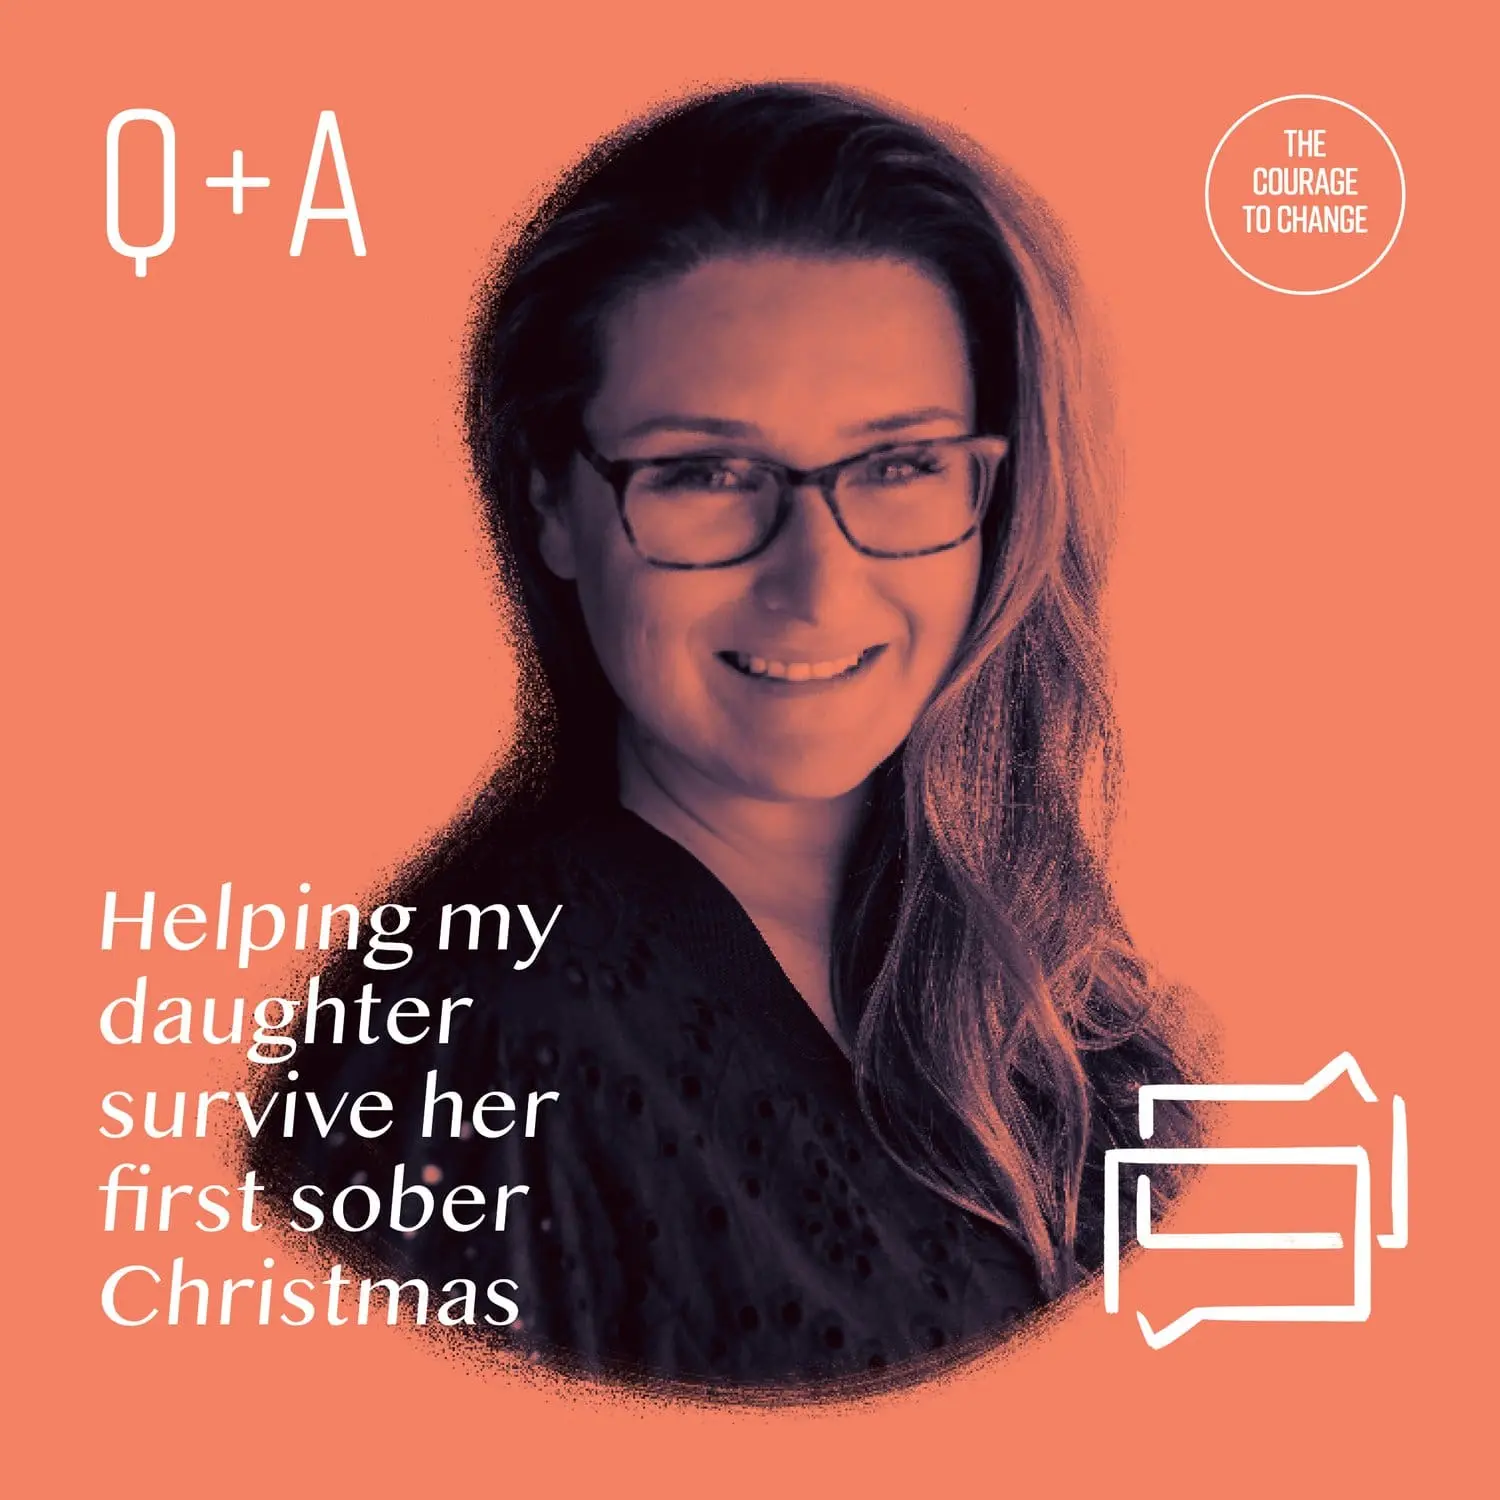 Q+A Helping My Daughter Survive Her First Sober Christmas